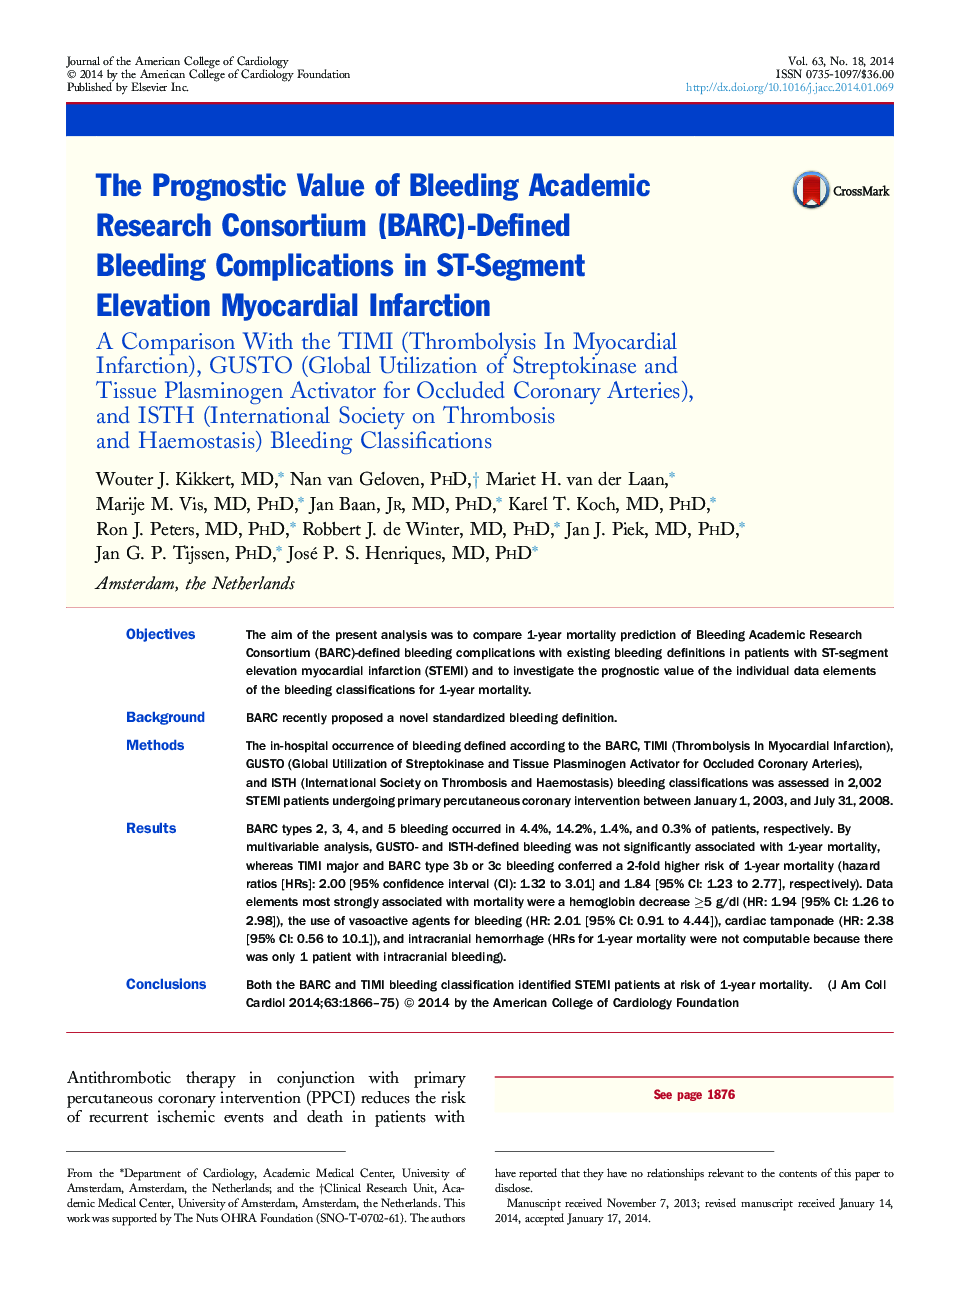 The Prognostic Value of Bleeding Academic Research Consortium (BARC)-Defined Bleeding Complications in ST-Segment Elevation Myocardial Infarction : A Comparison With the TIMI (Thrombolysis In Myocardial Infarction), GUSTO (Global Utilization of Streptokin